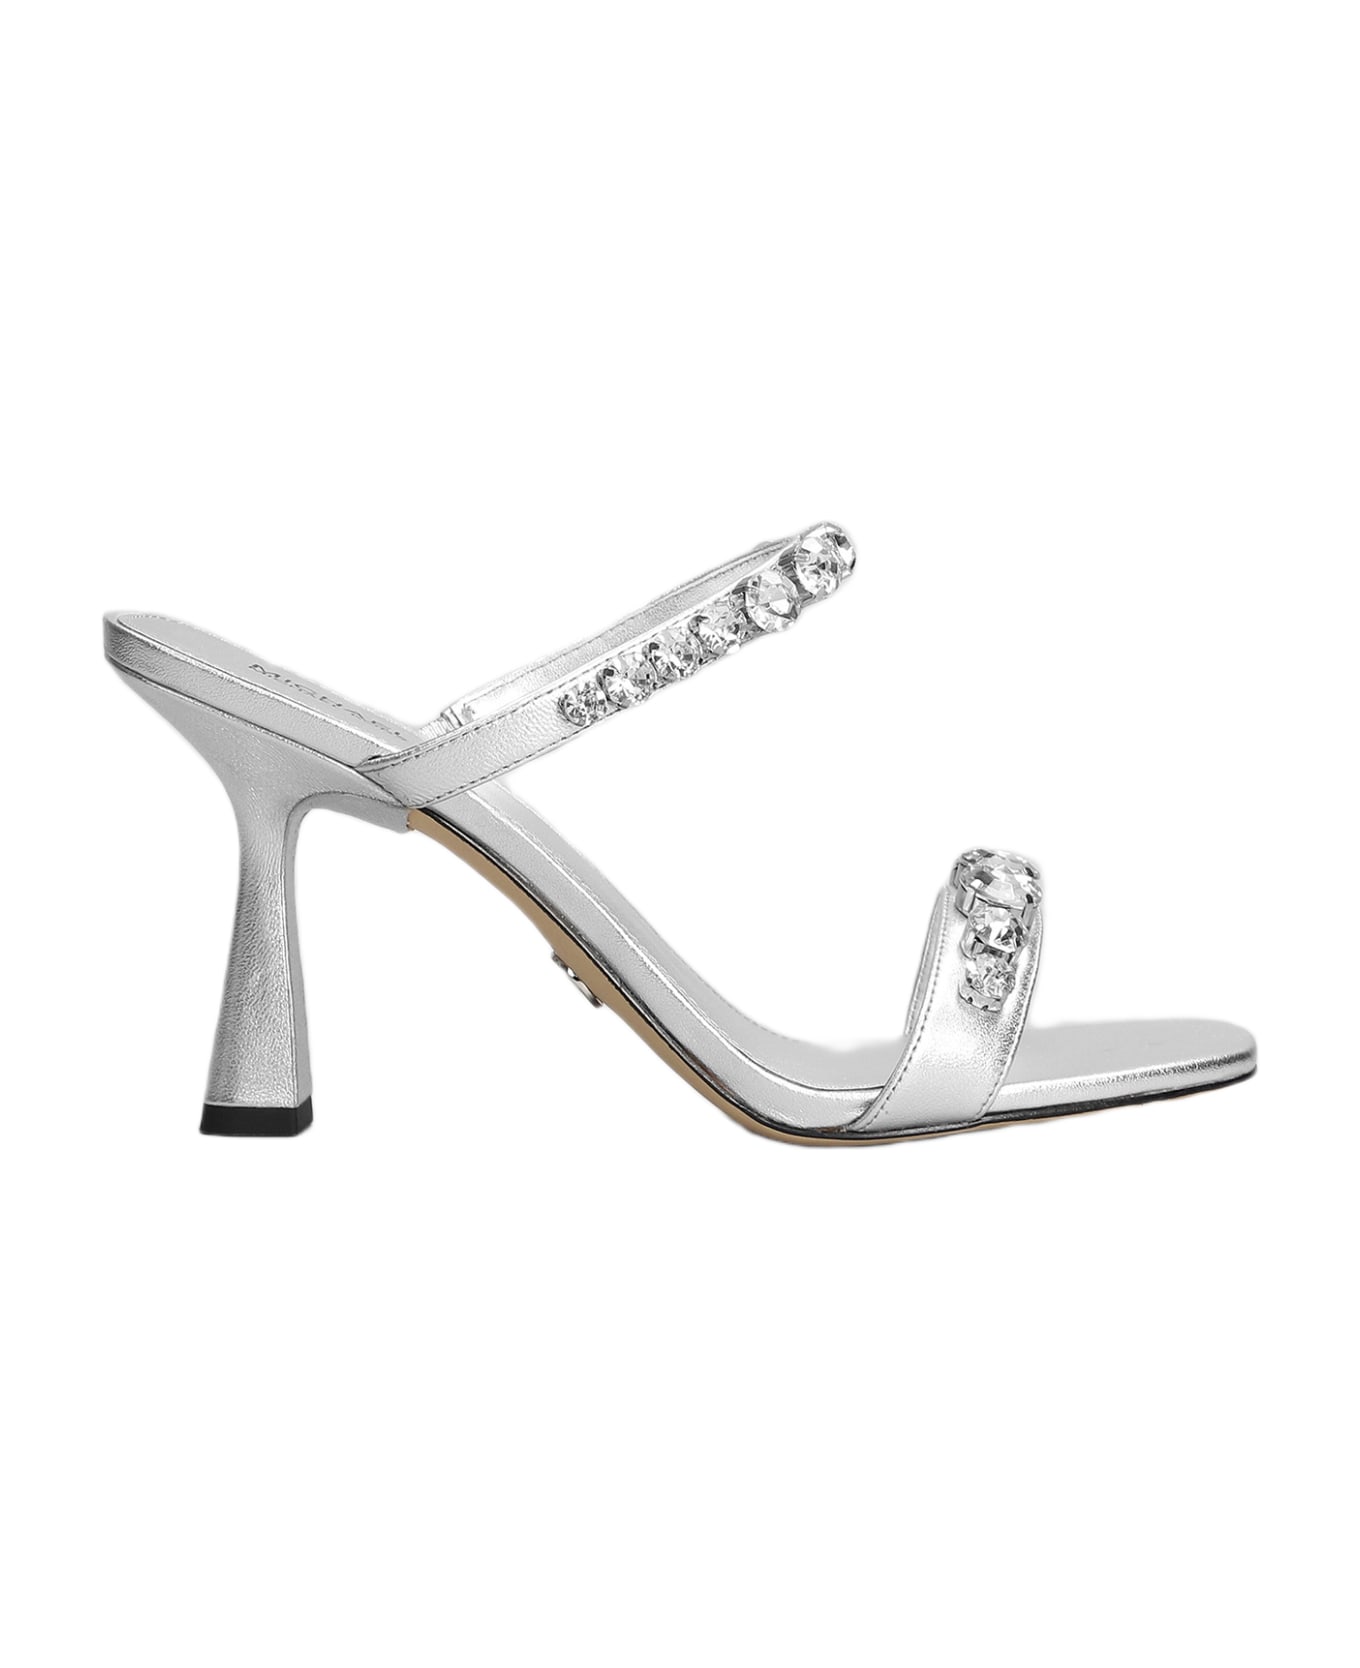 Michael Kors Clara Sandals In Silver Leather - Argento